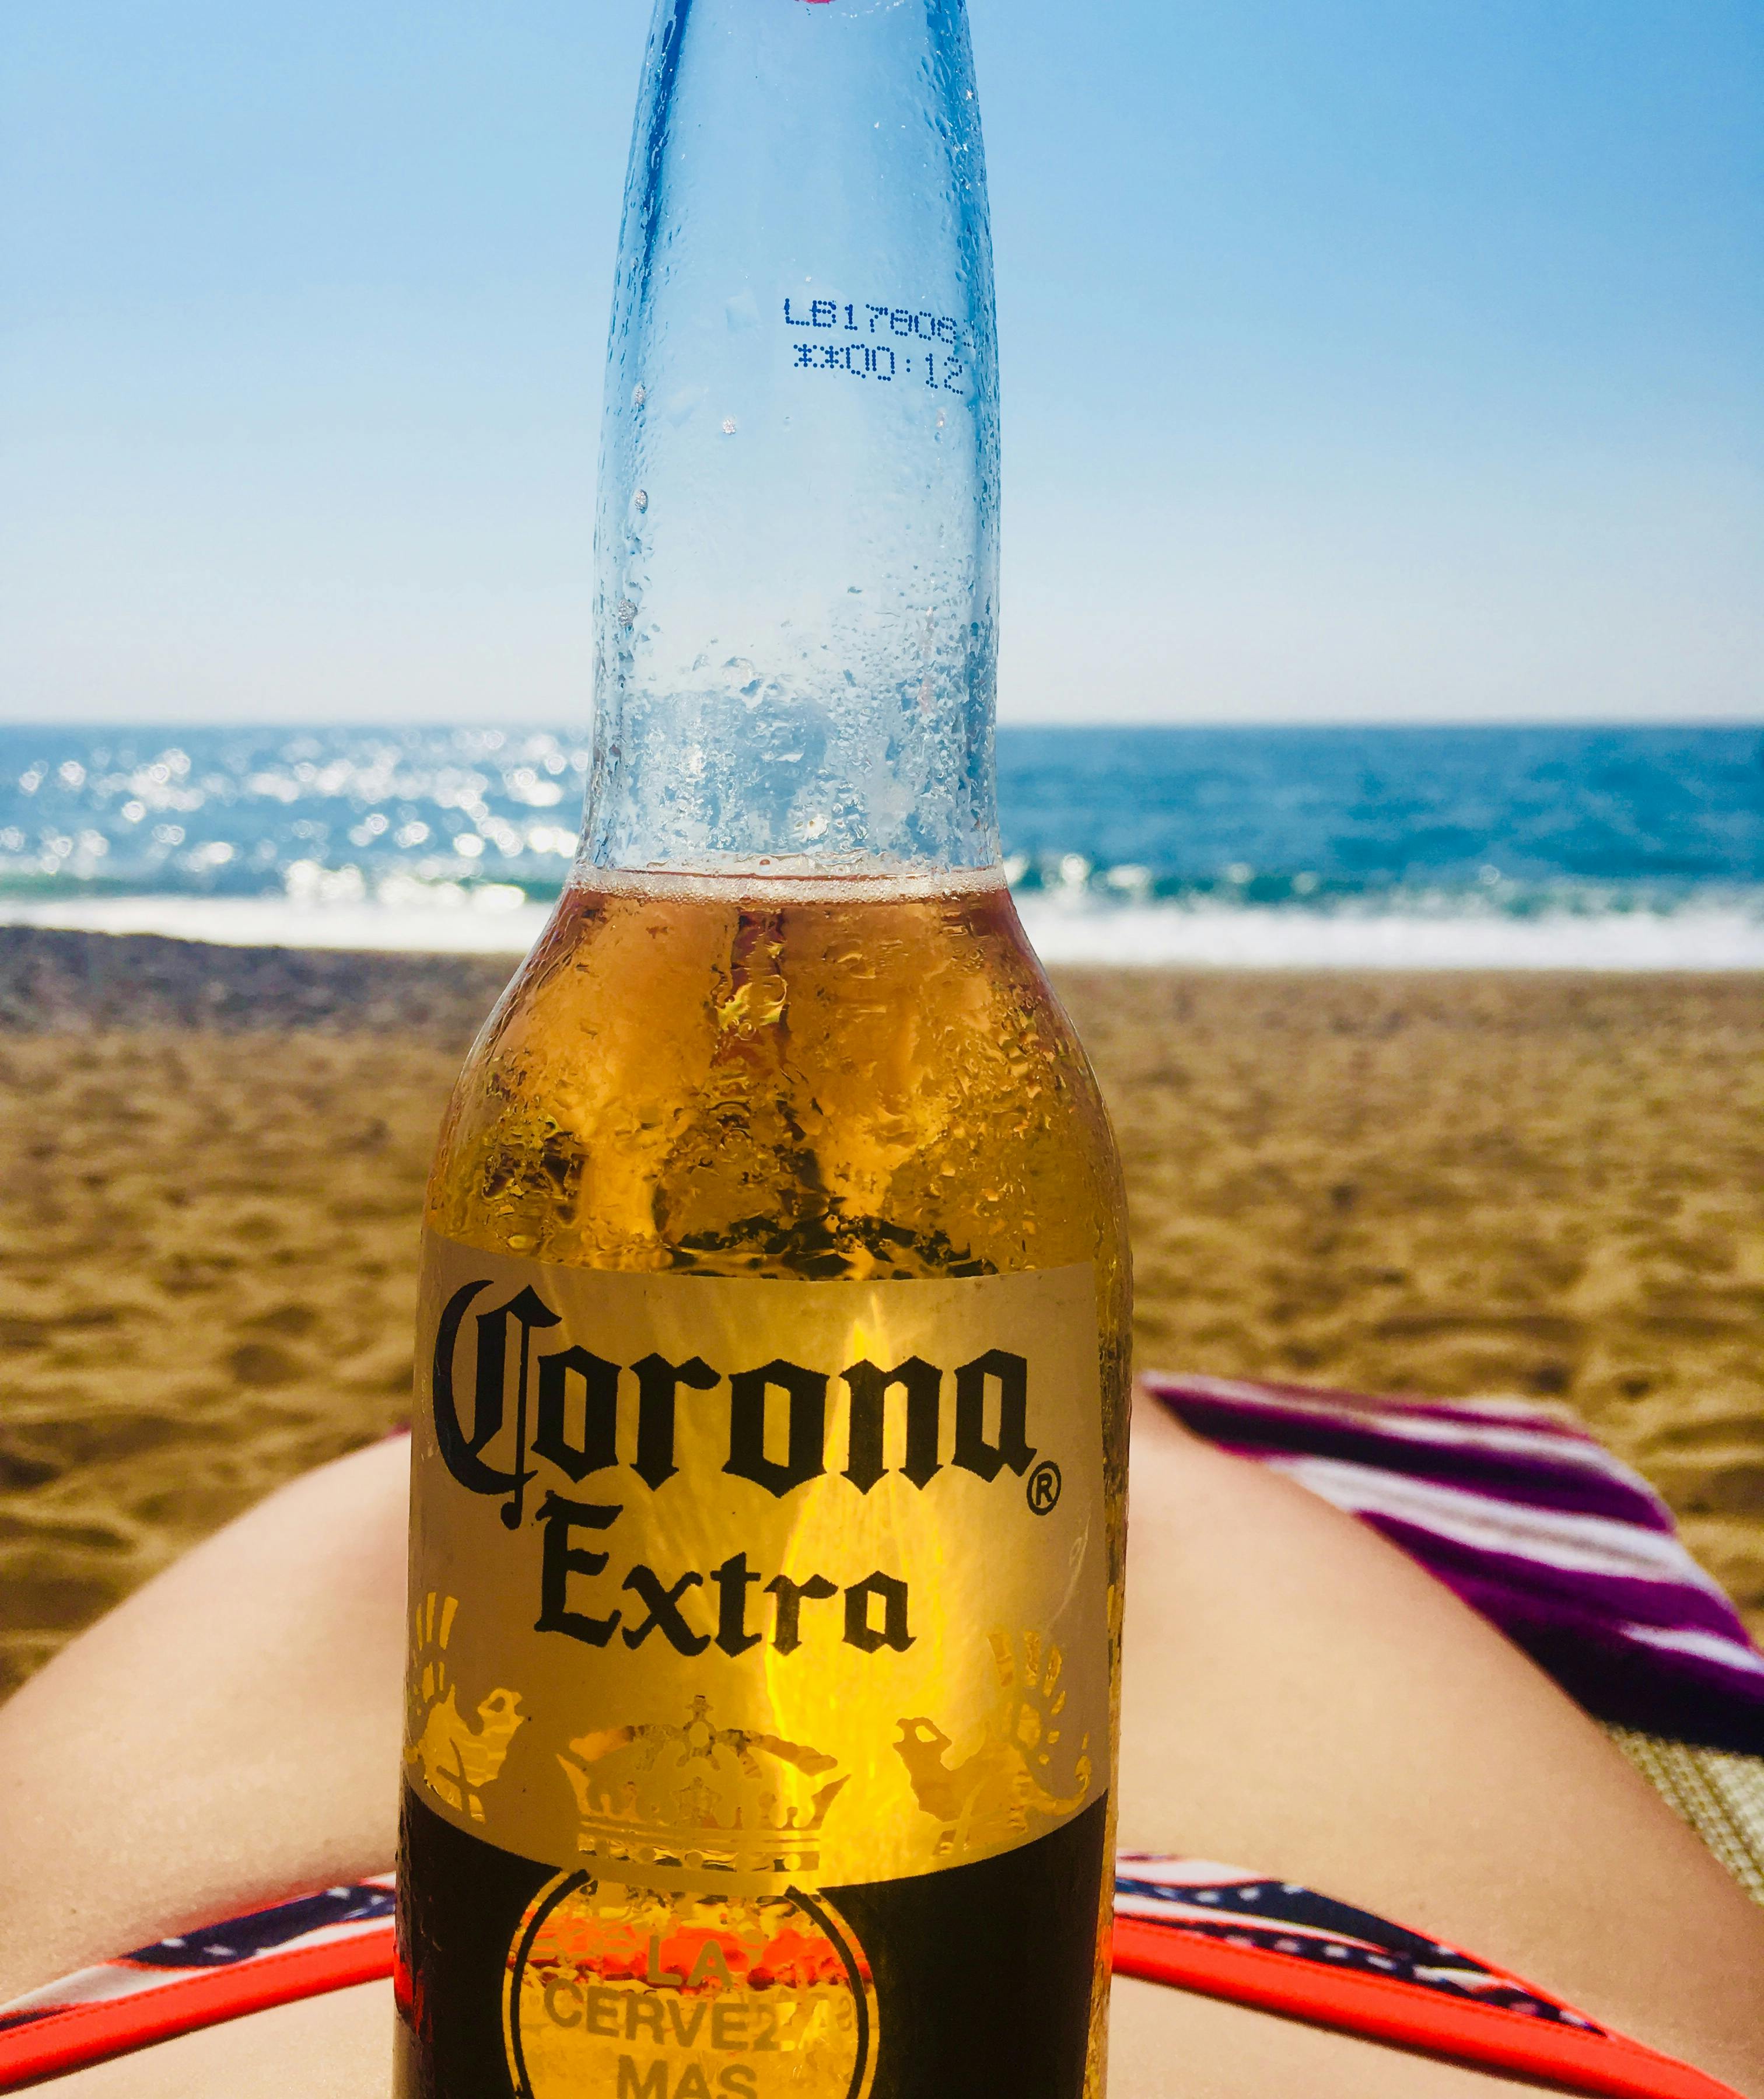 Free stock photo of beer and beach, Beer on stomach, corona beer